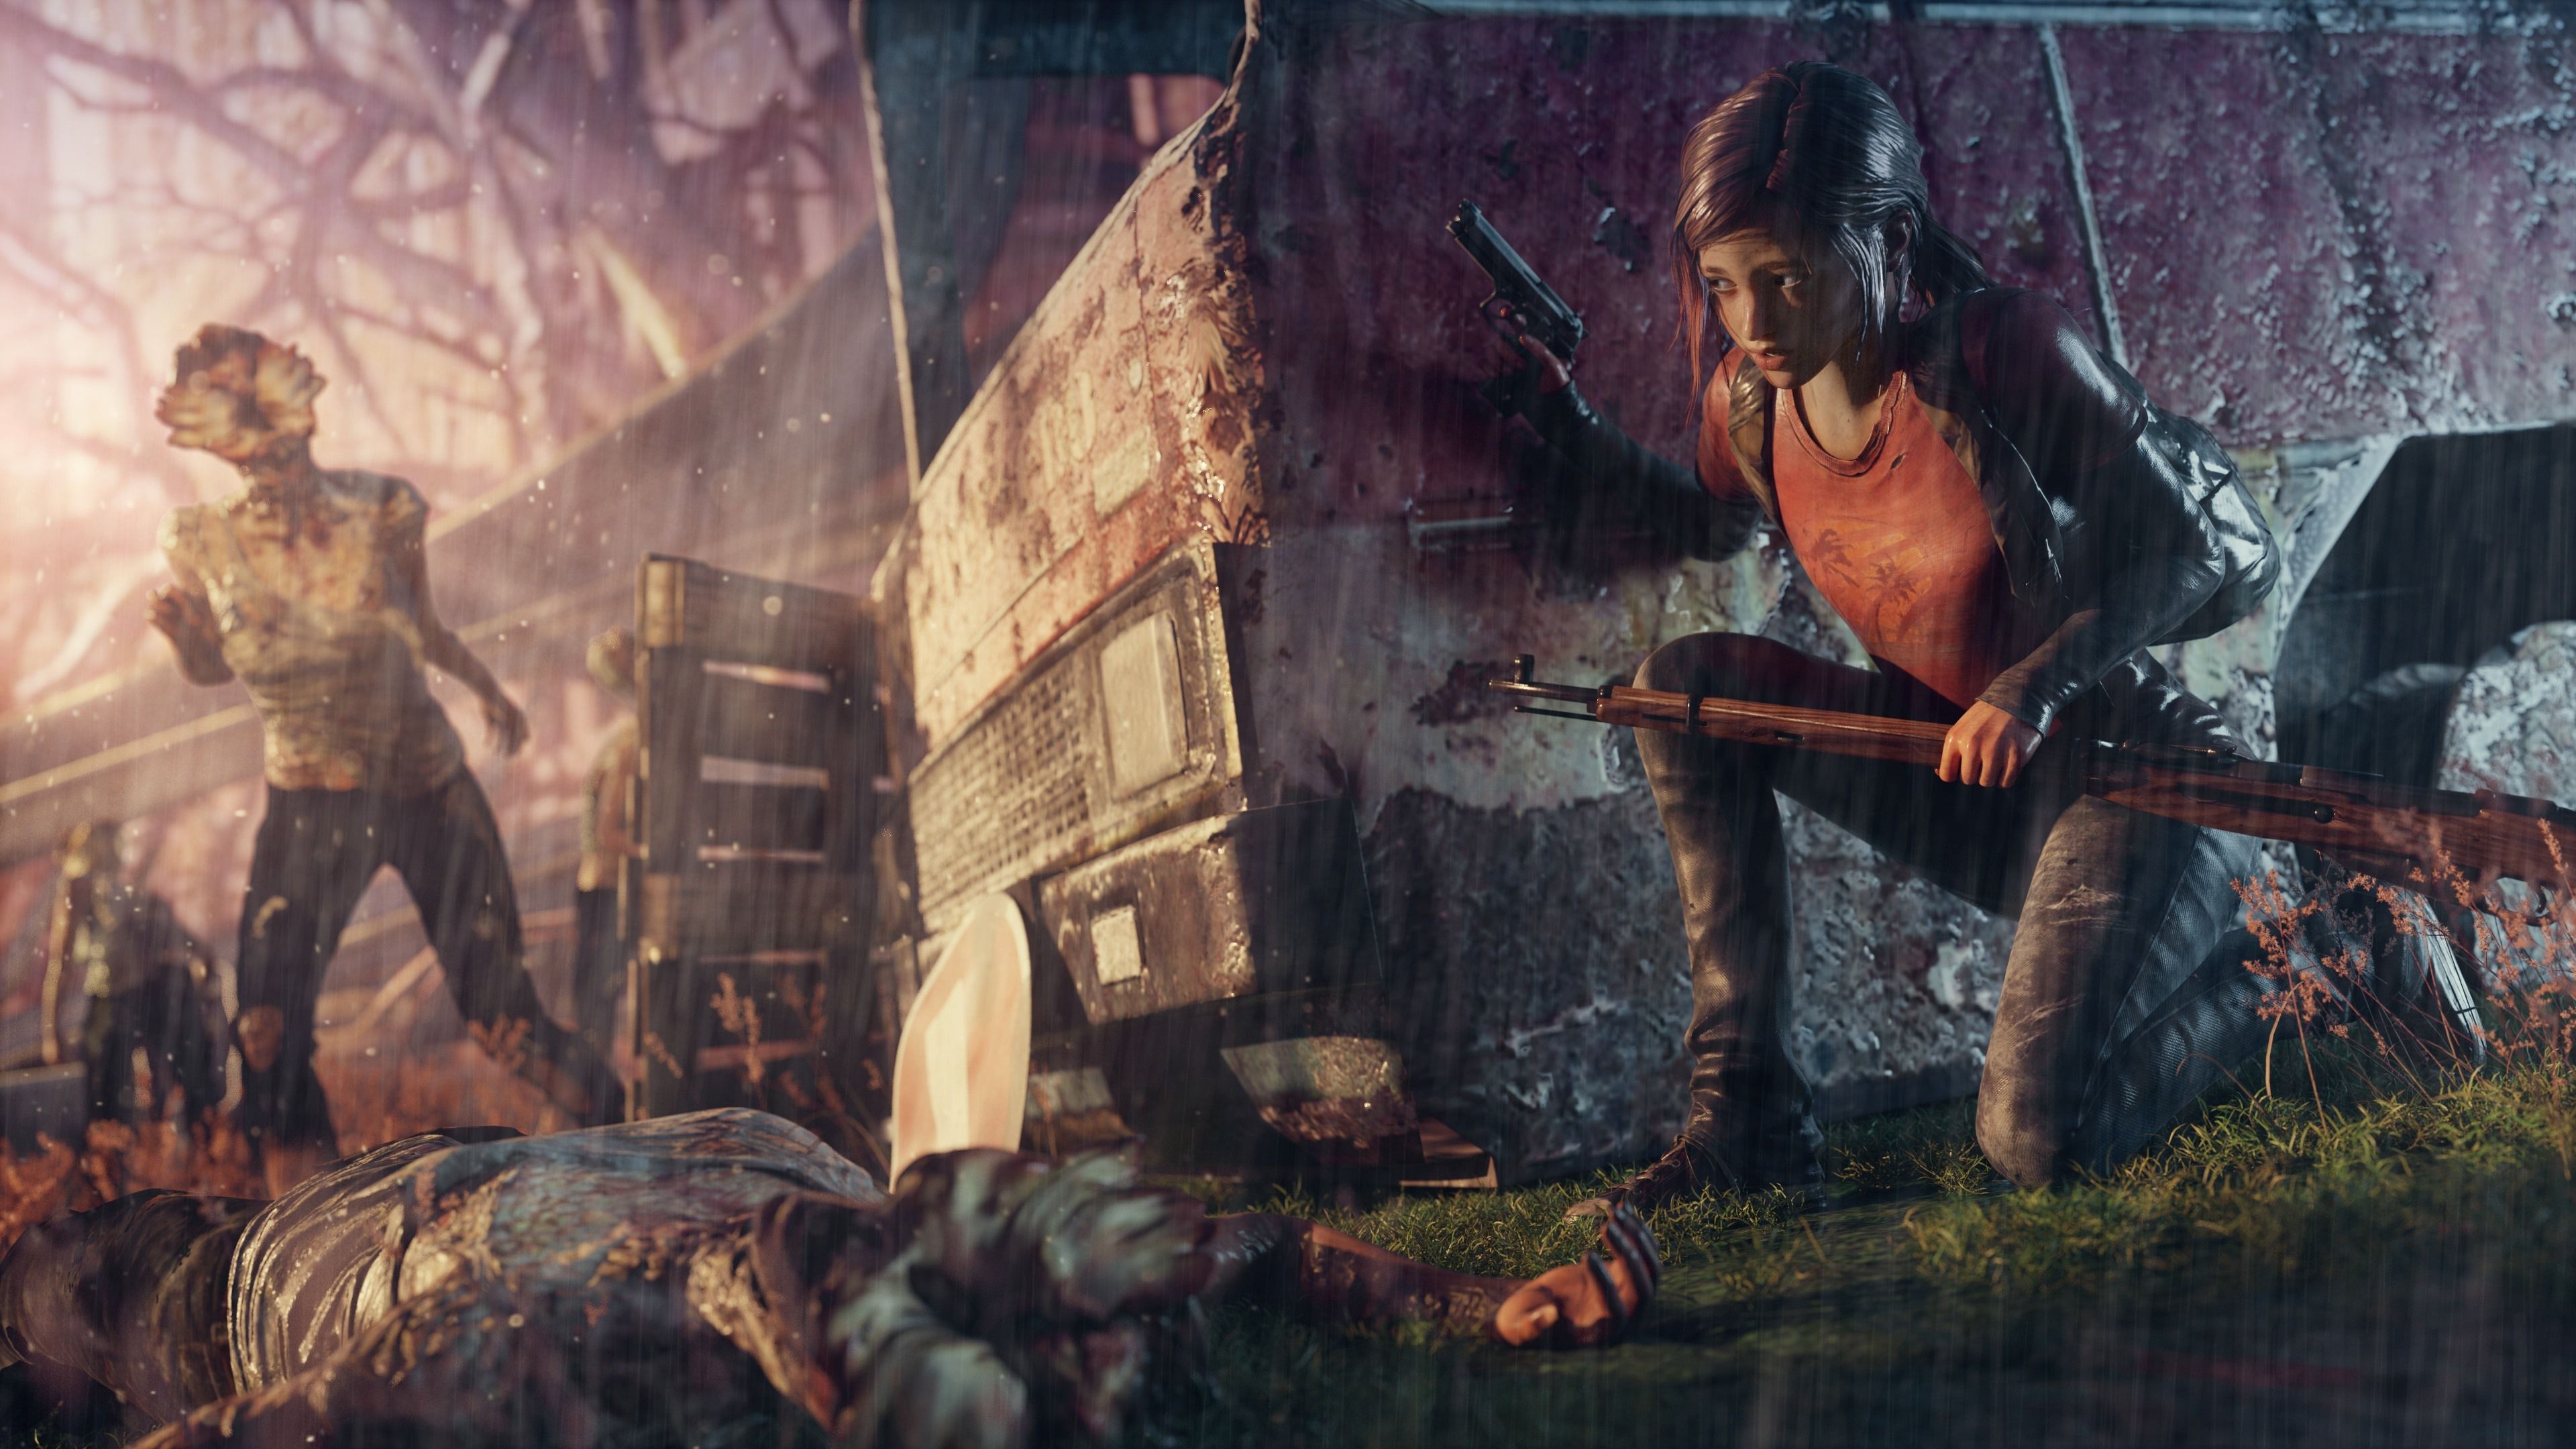 23+] The Last Of Us Wallpapers